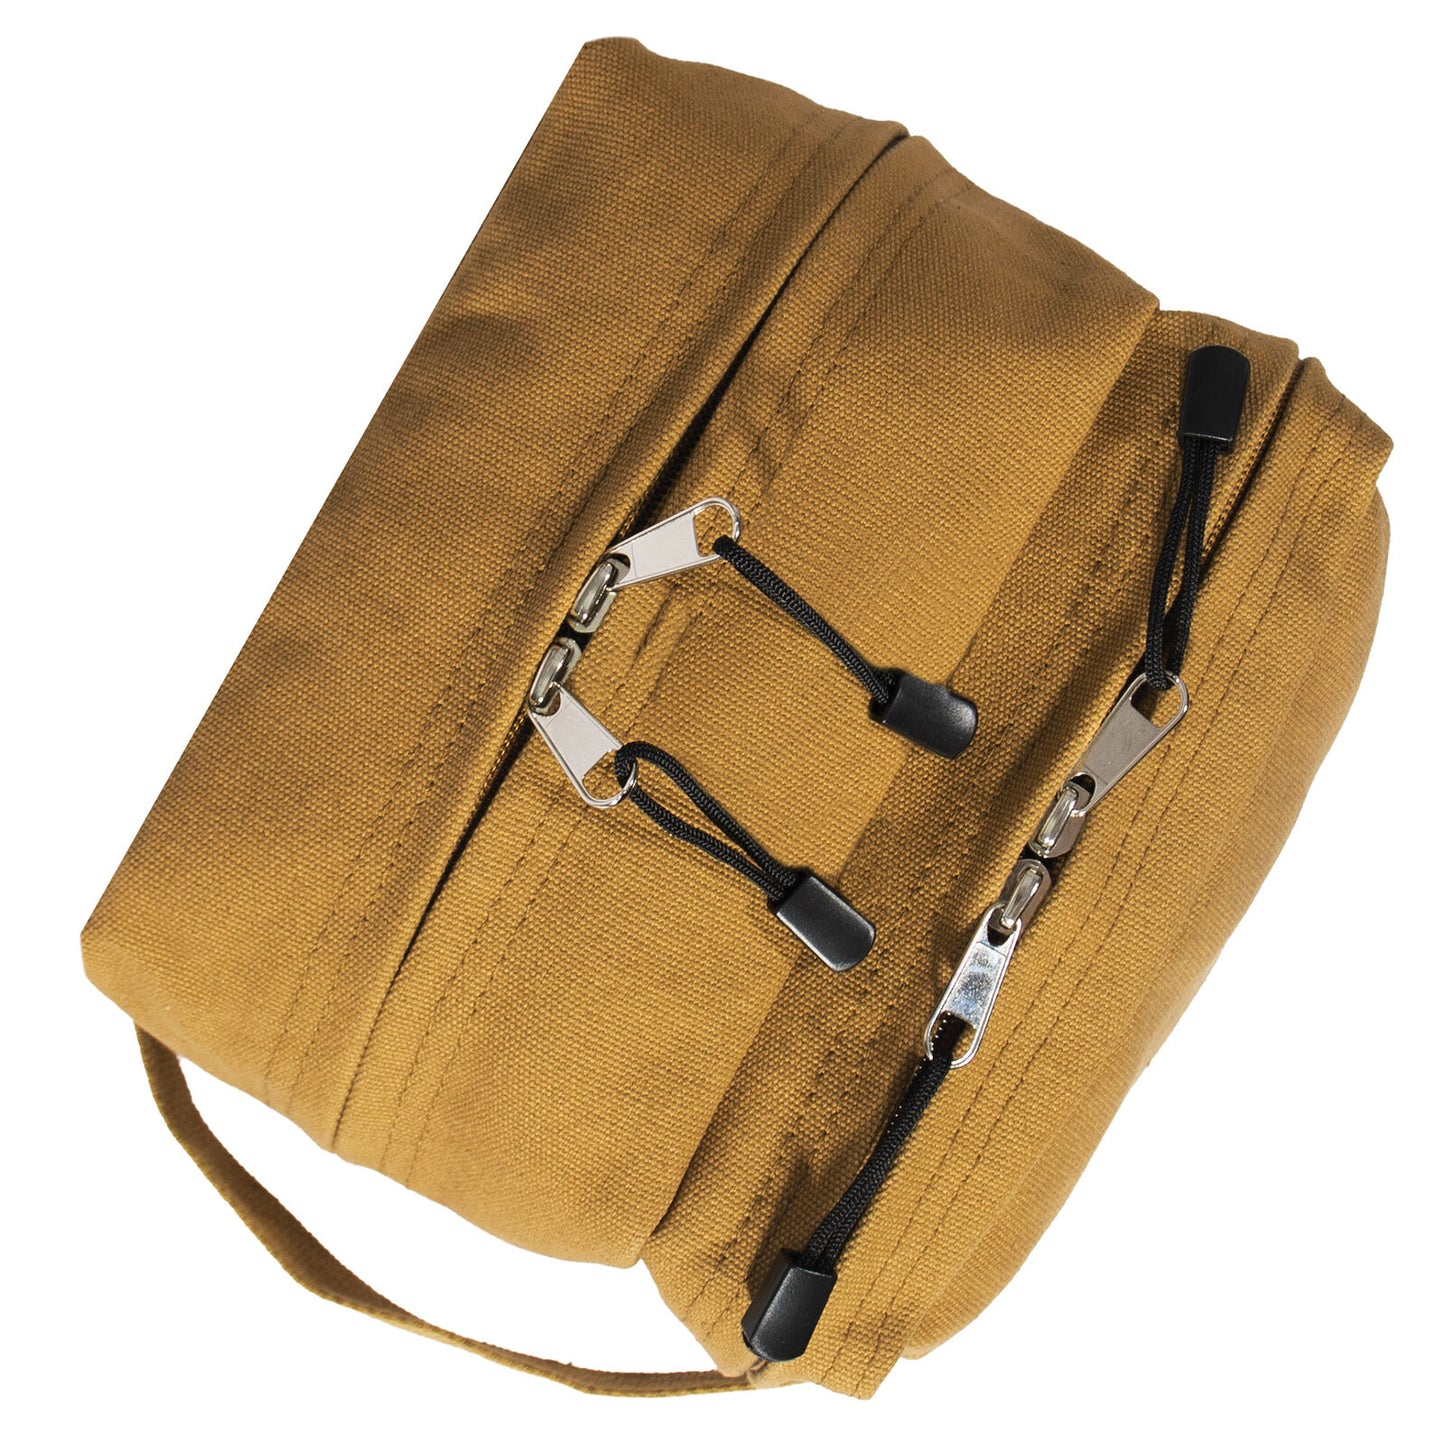 Coyote Brown Canvas Dual Compartment Travel Kit Toiletry Bag